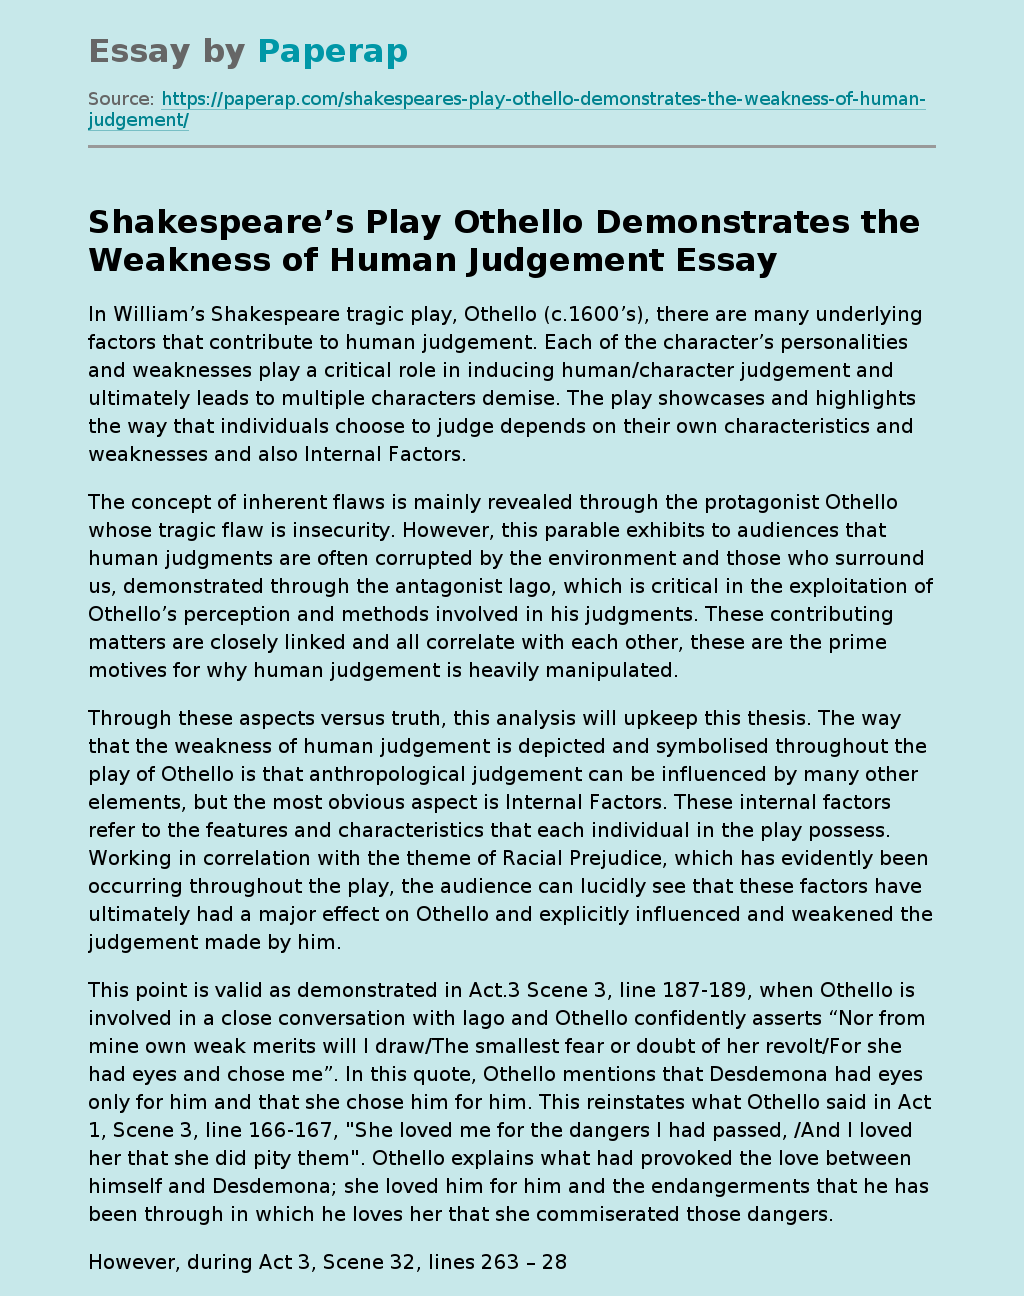 Shakespeare’s Play Othello Demonstrates the Weakness of Human Judgement